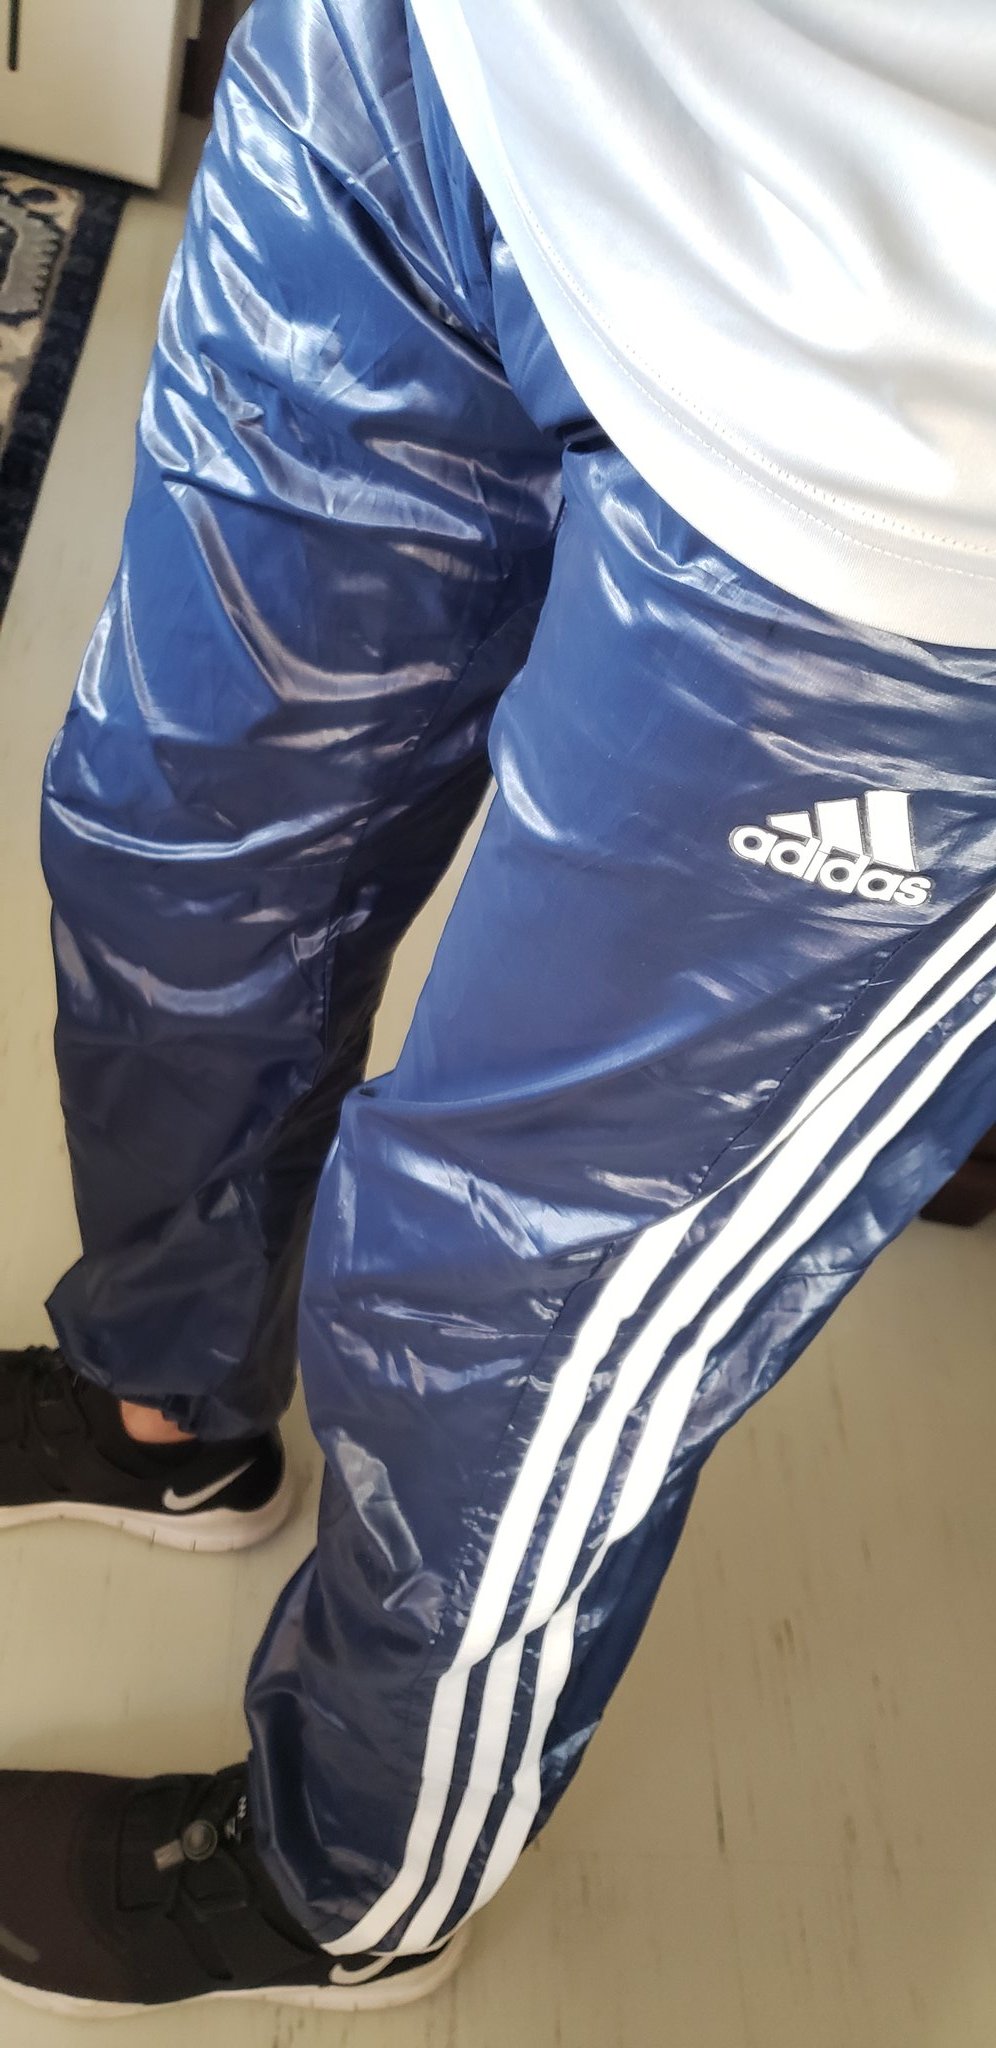 Comprimir Personas con discapacidad auditiva Amedrentador SportyNylon on Twitter: "Loving these! So soft and silky, and shiny too!  https://t.co/U86LfoBAa0" / Twitter